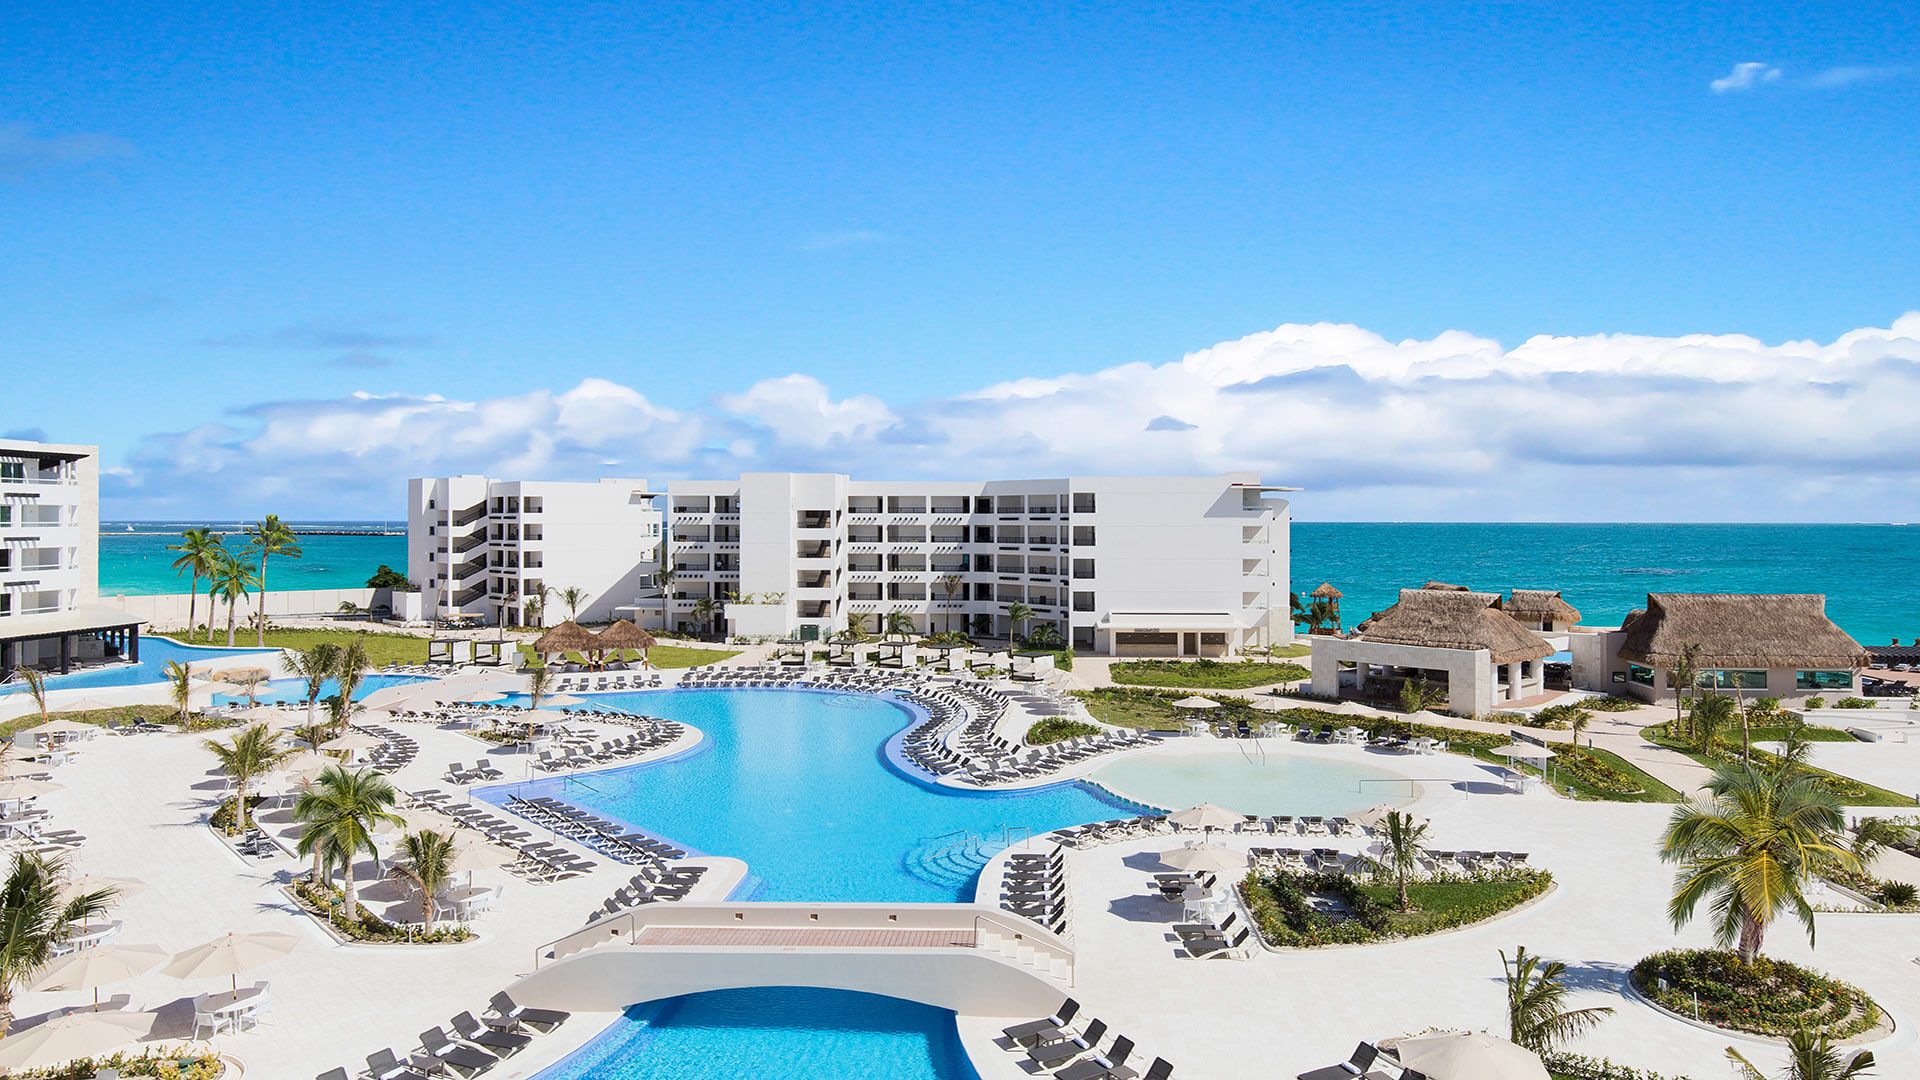 Overview of El Cid Resorts in the Riviera Maya